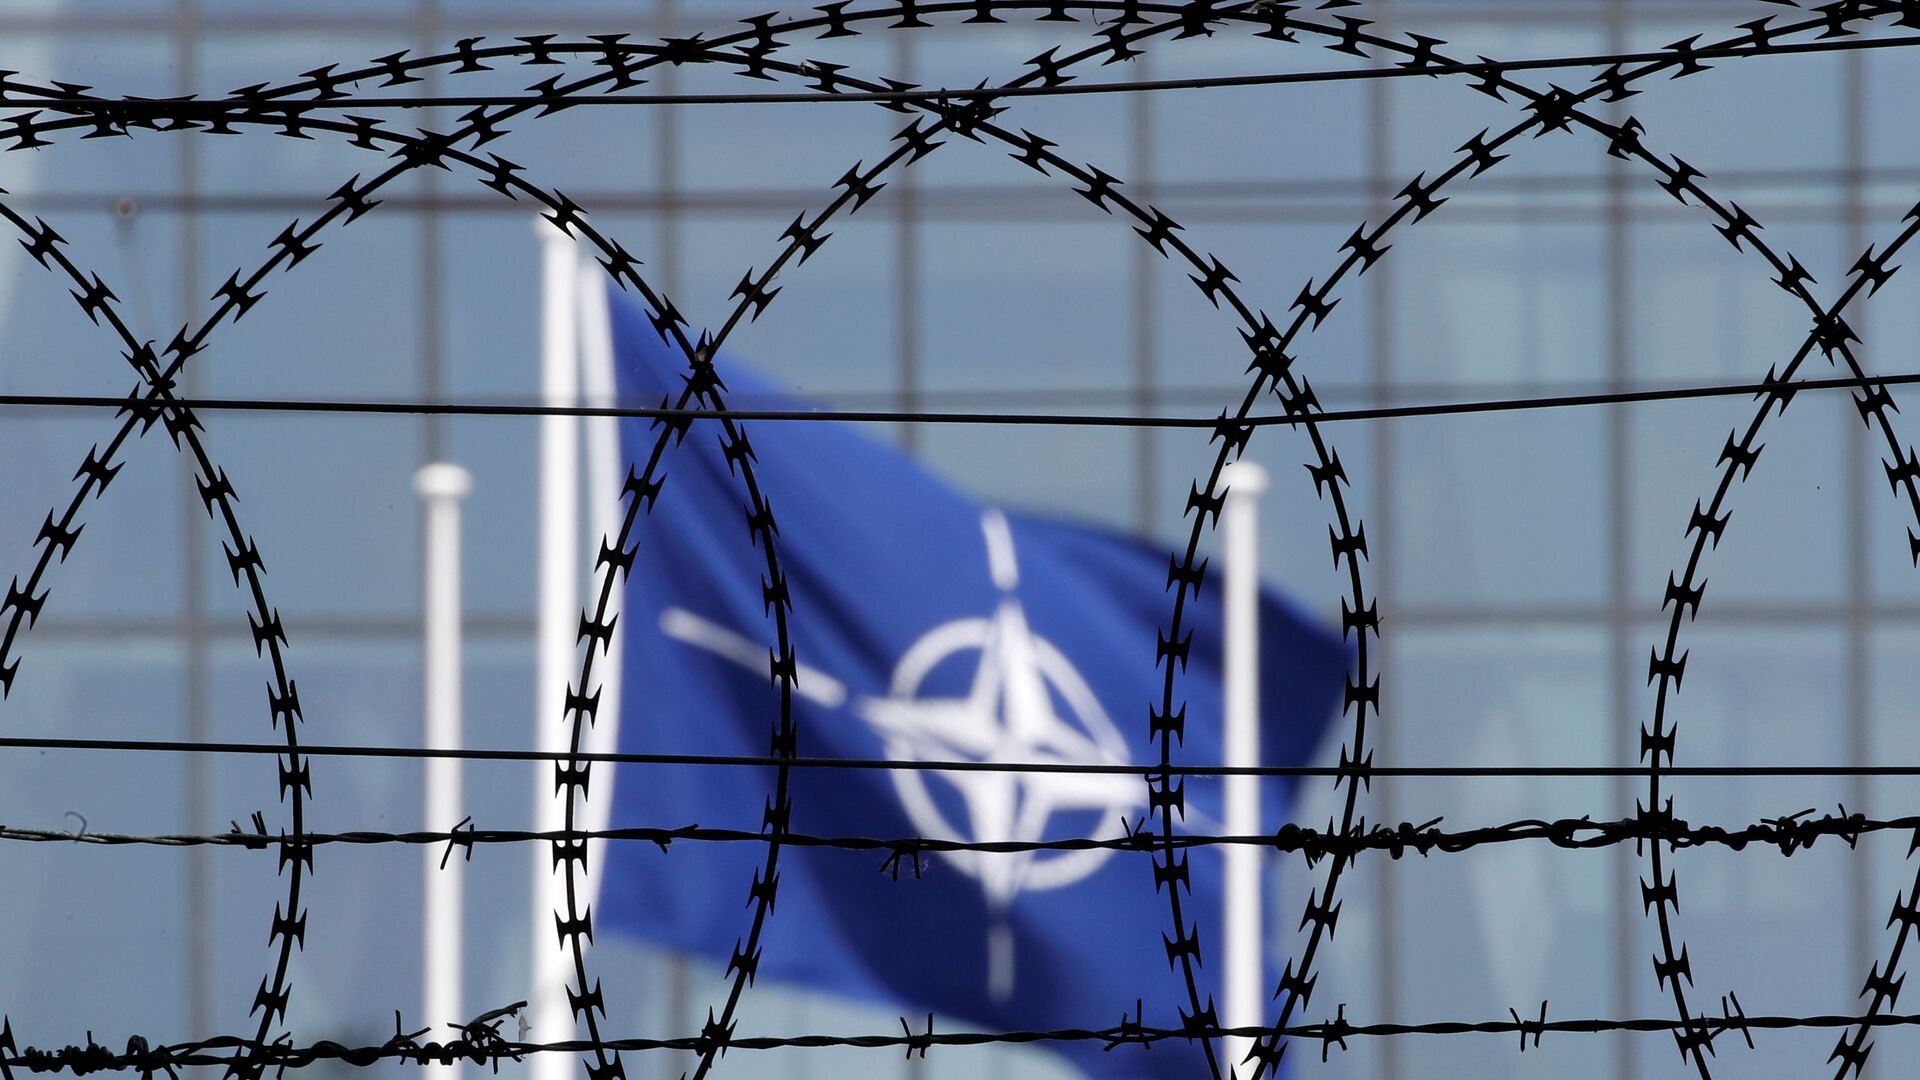 The NATO flag is seen through barbed wire as it flies in front of the new NATO Headquarters in Brussels, Belgium May 24, 2017 - Sputnik International, 1920, 15.06.2021